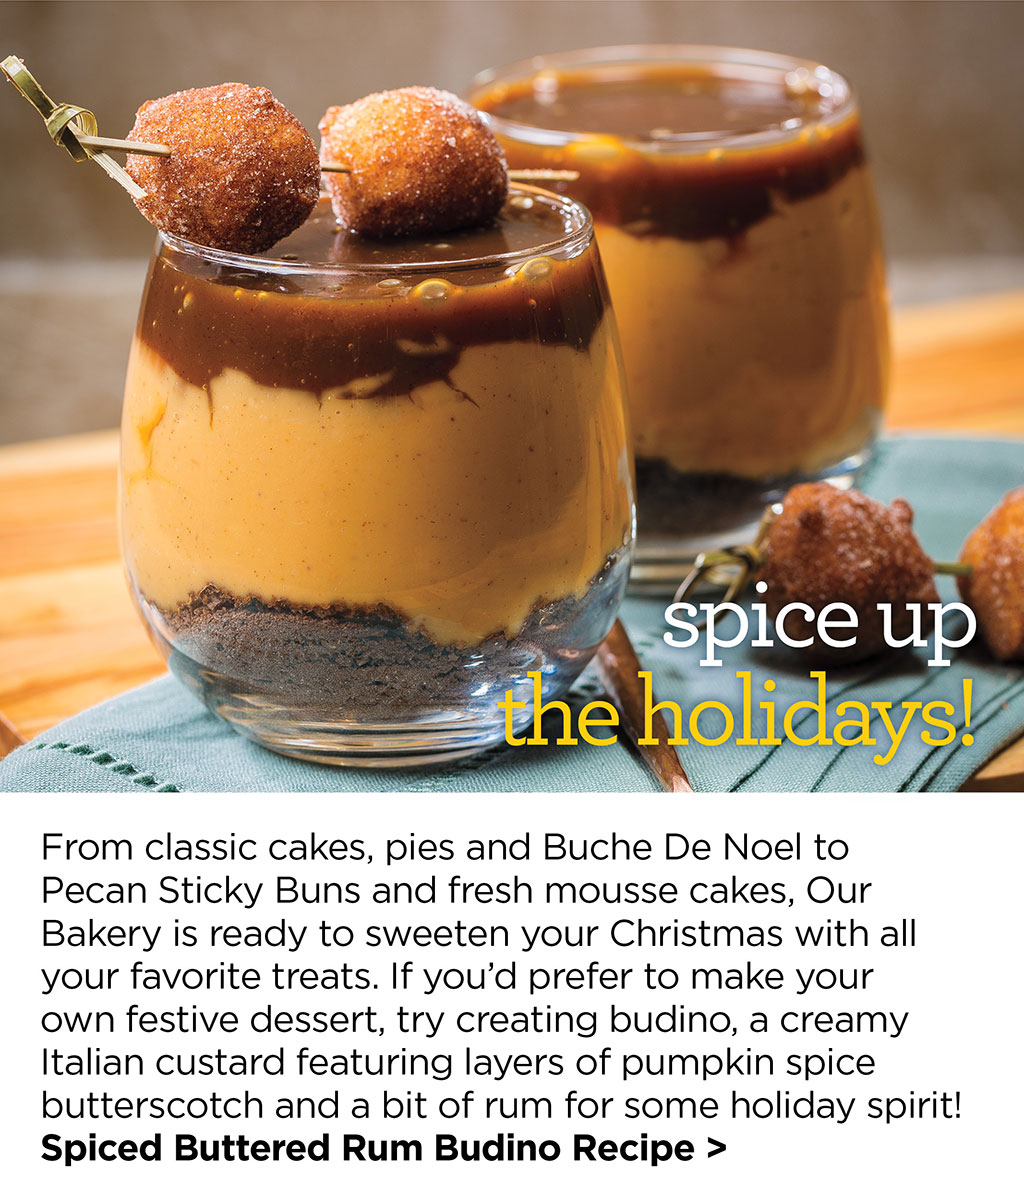 spice up the holidays! From classic cakes, pies and Buche De Noel to Pecan Sticky Buns and fresh mousse cakes, Our Bakery is ready to sweeten your Christmas with all your favorite treats. If youd prefer to make your own festive dessert, try creating budino, a creamy Italian custard featuring layers of pumpkin spice butterscotch and a bit of rum for some holiday spirit! Spiced Buttered Rum Budino Recipe >